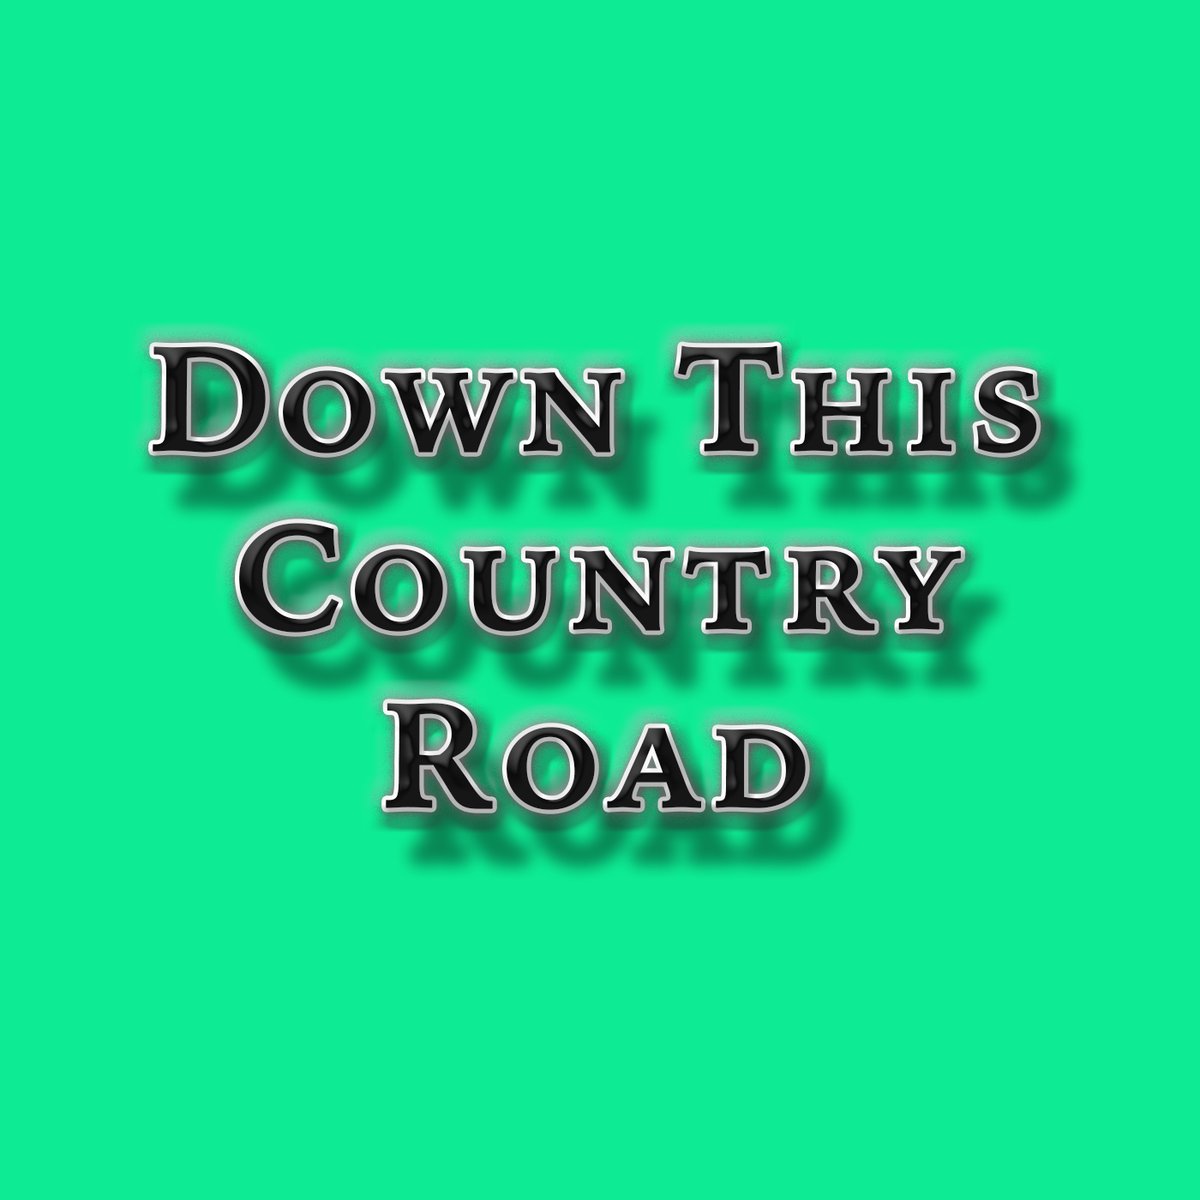 #spotify #playlist - Down This Country Road.
52 Country Singers, 67 Country Songs. With New artists like - @GabeChoatemusic, @TeleyIrons, @LarnerGina, @SHOWDOWN__band, @ChrisHunttJr, @Stokoff1, @BygoneDave, & many more. #newcountry #music #musica

open.spotify.com/playlist/6nDQq…